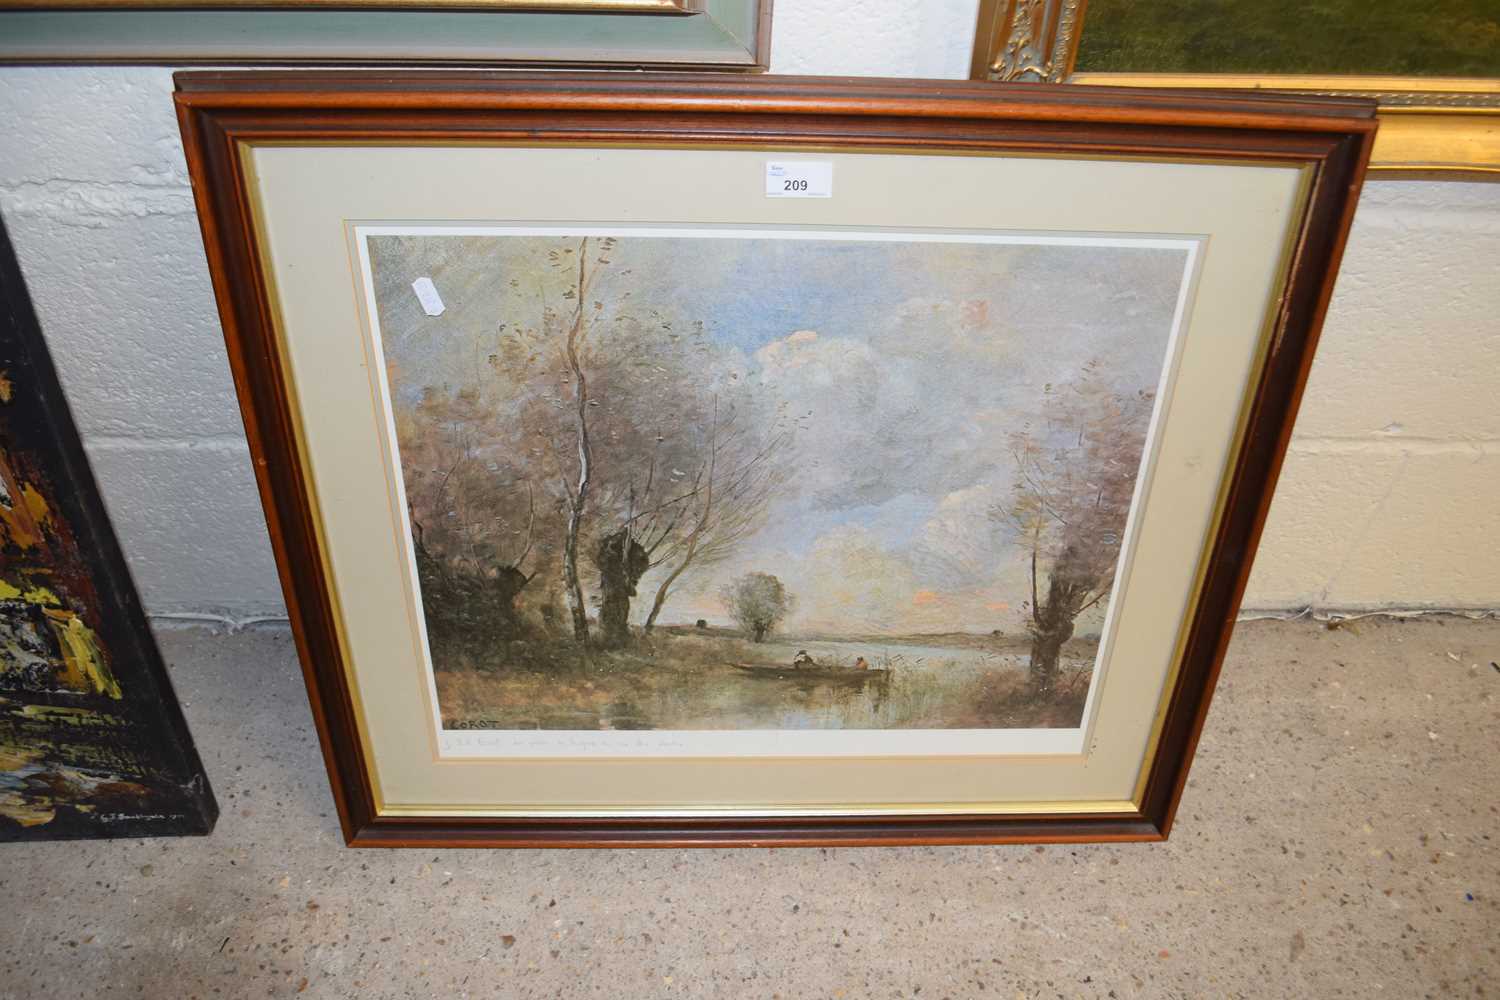 Reproduction print by Corot, framed and glazed